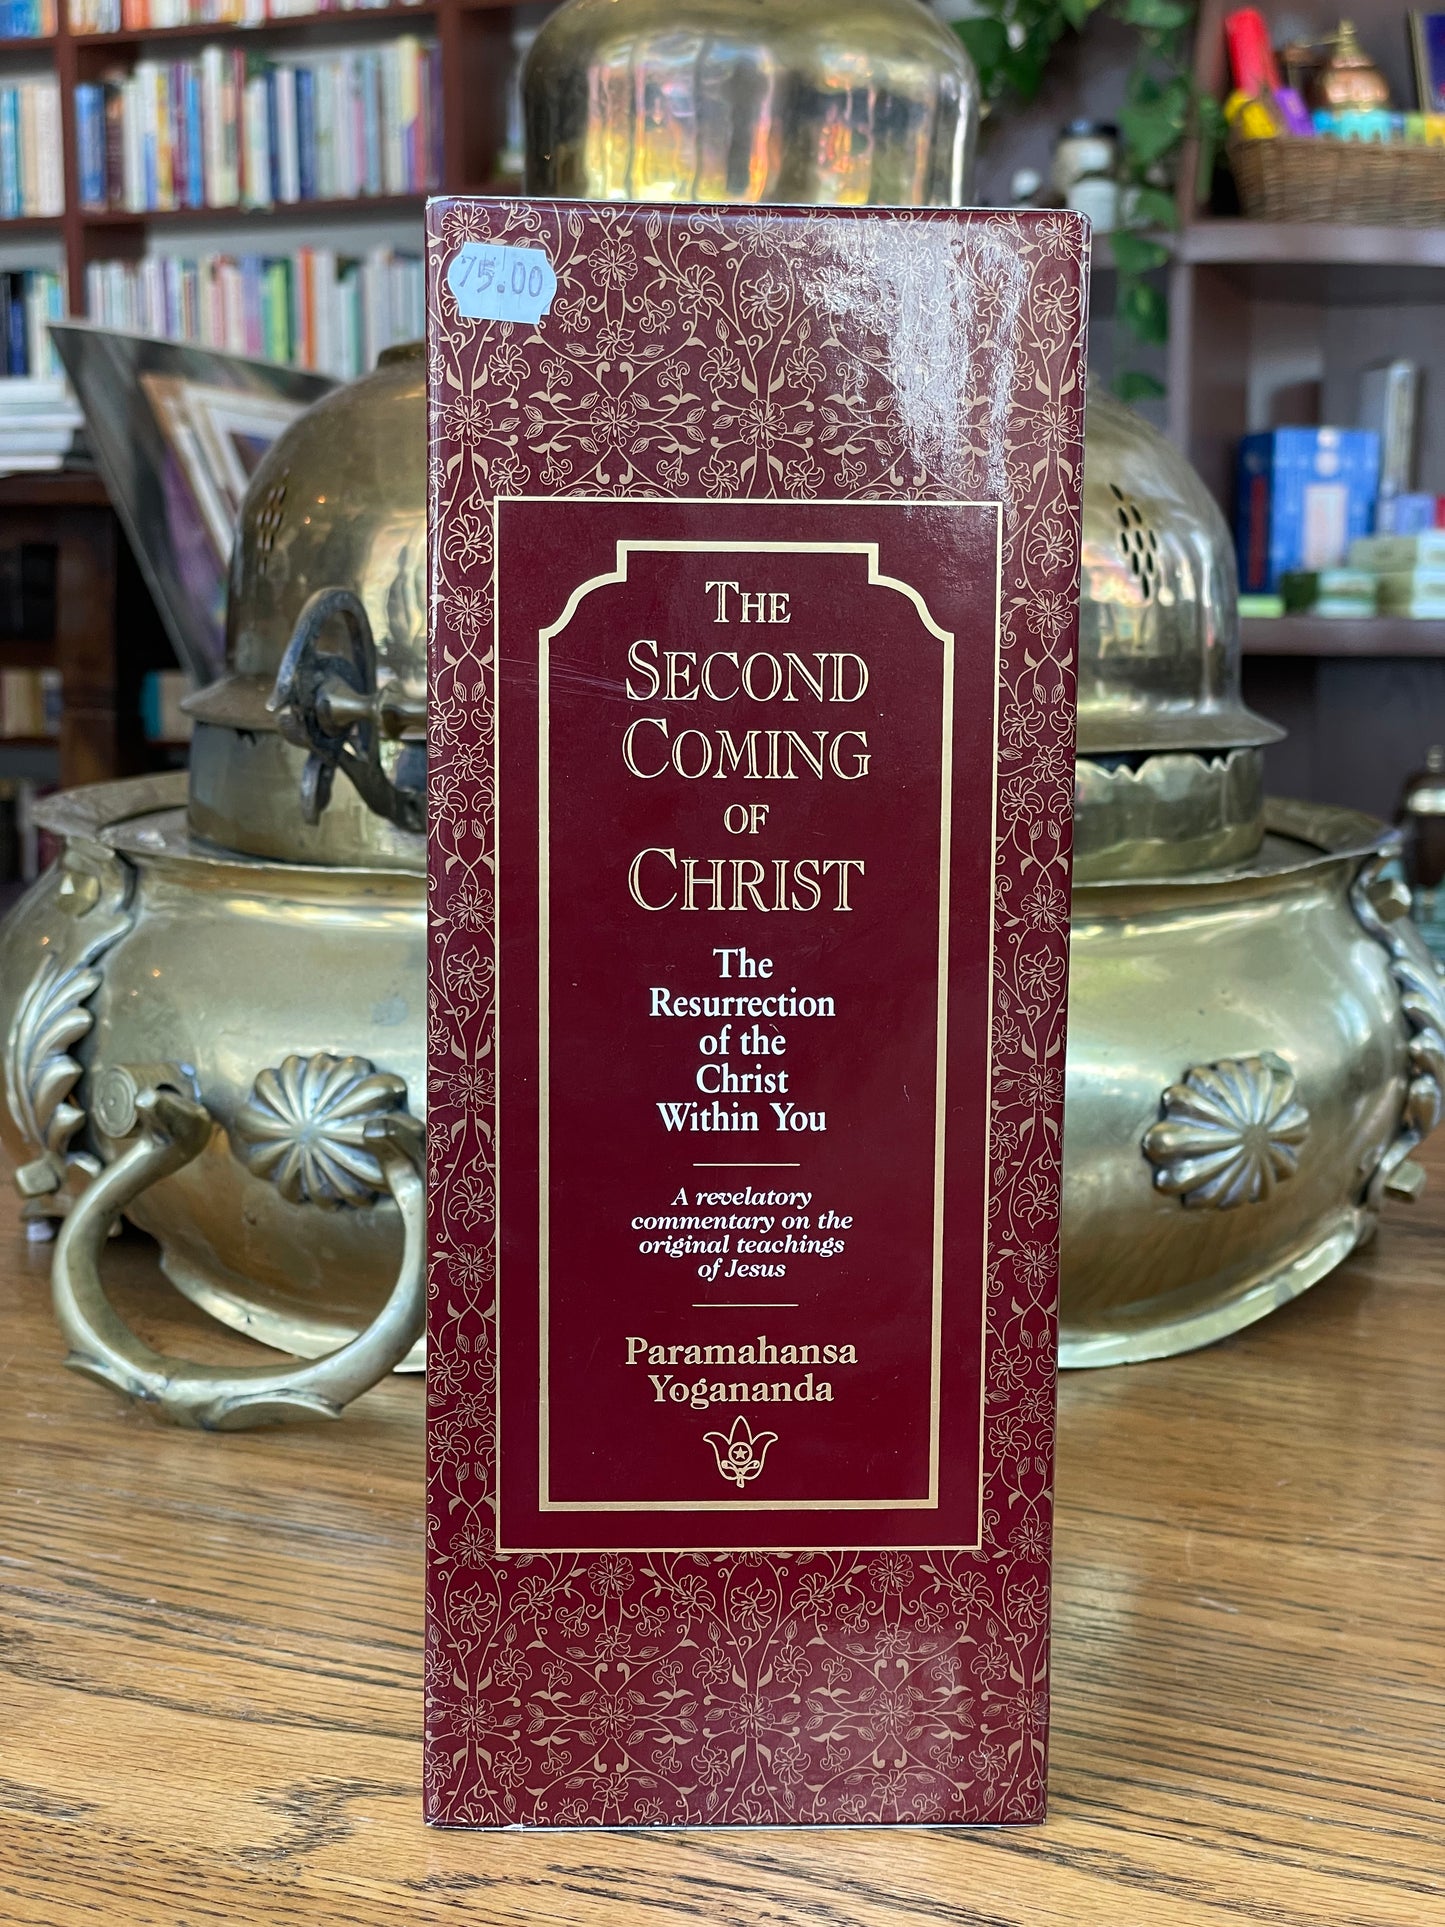 The Second Coming of Christ by Paramanhansa Yogananda